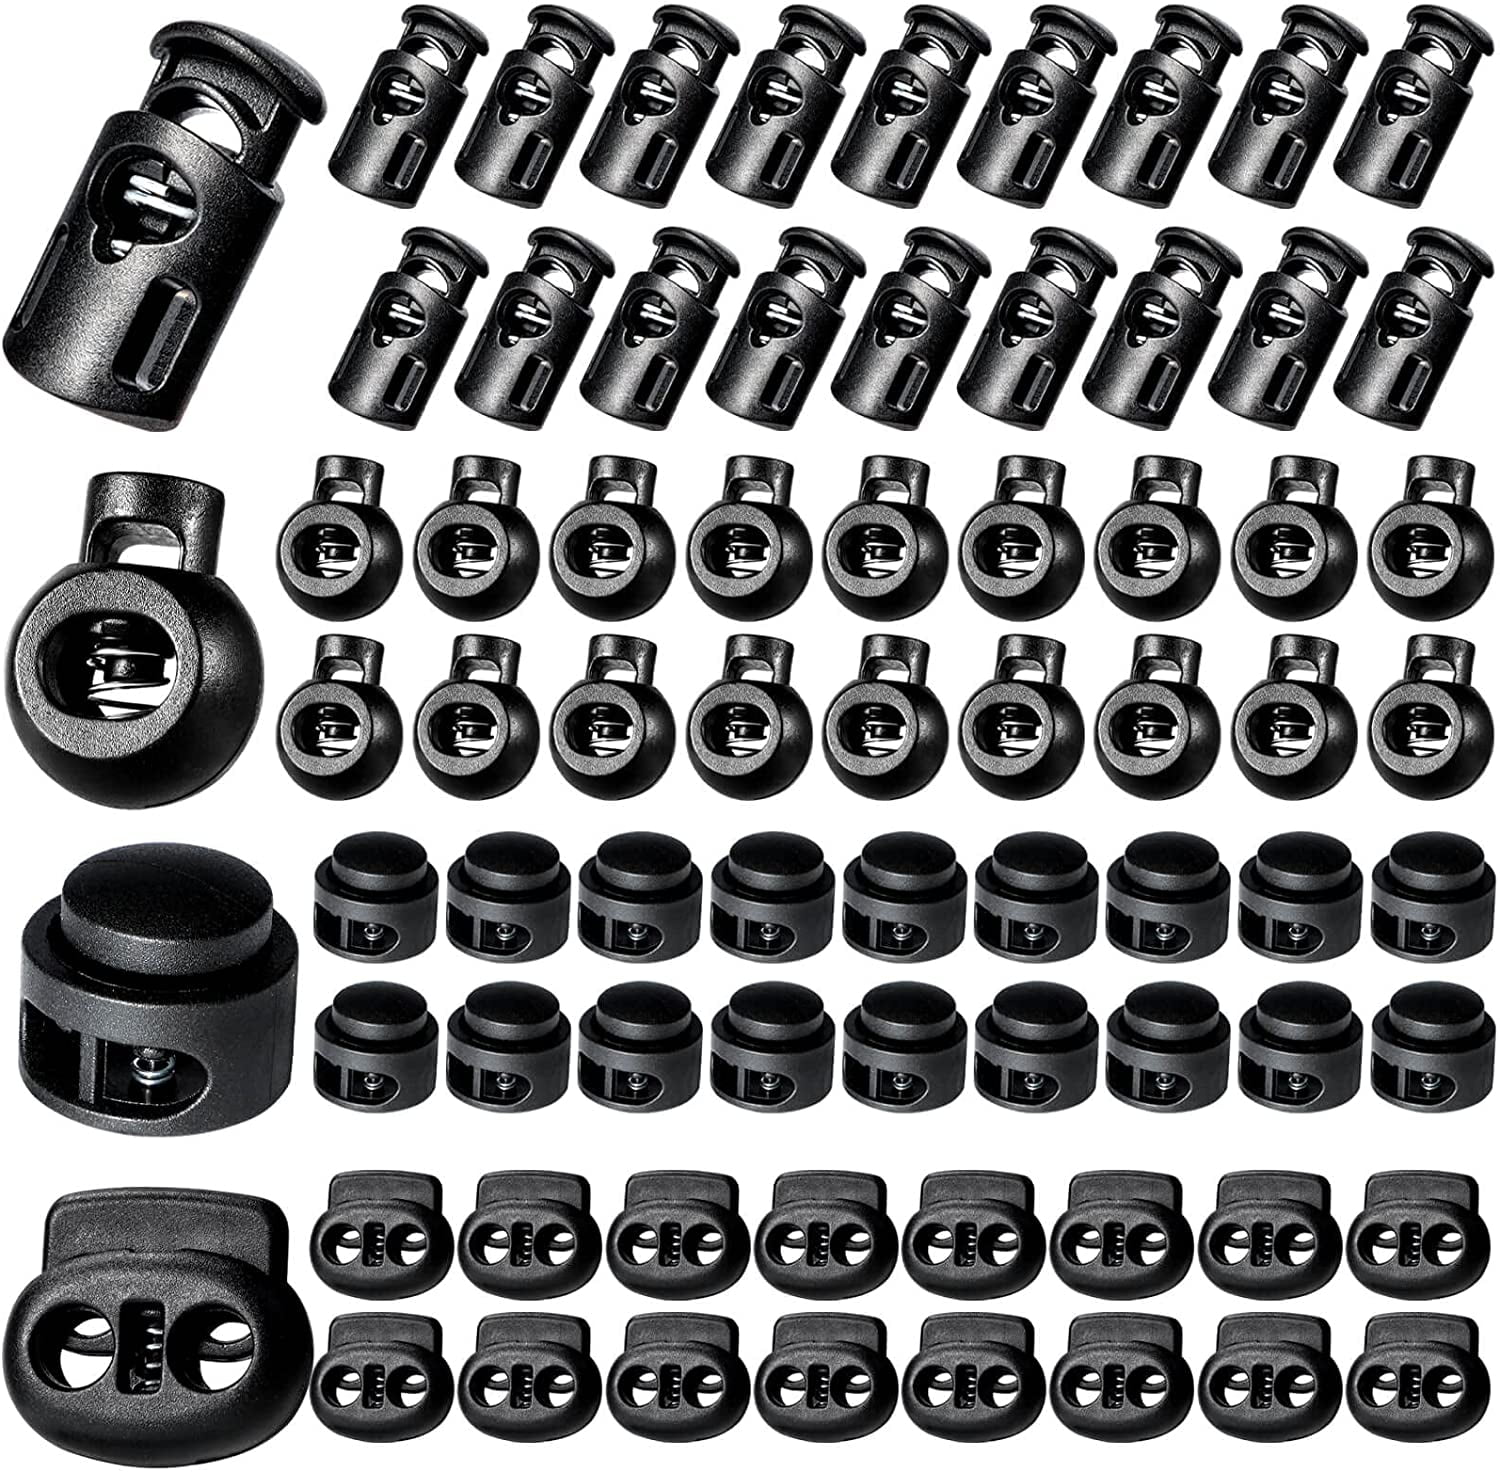 Plastic Cord Locks (0.22 inch x 0.16 inch)6pcs, Spring Cord Locks End Toggle Stoppers for Drawstrings, Bags, Shoelace Replacement, Clothing, Black